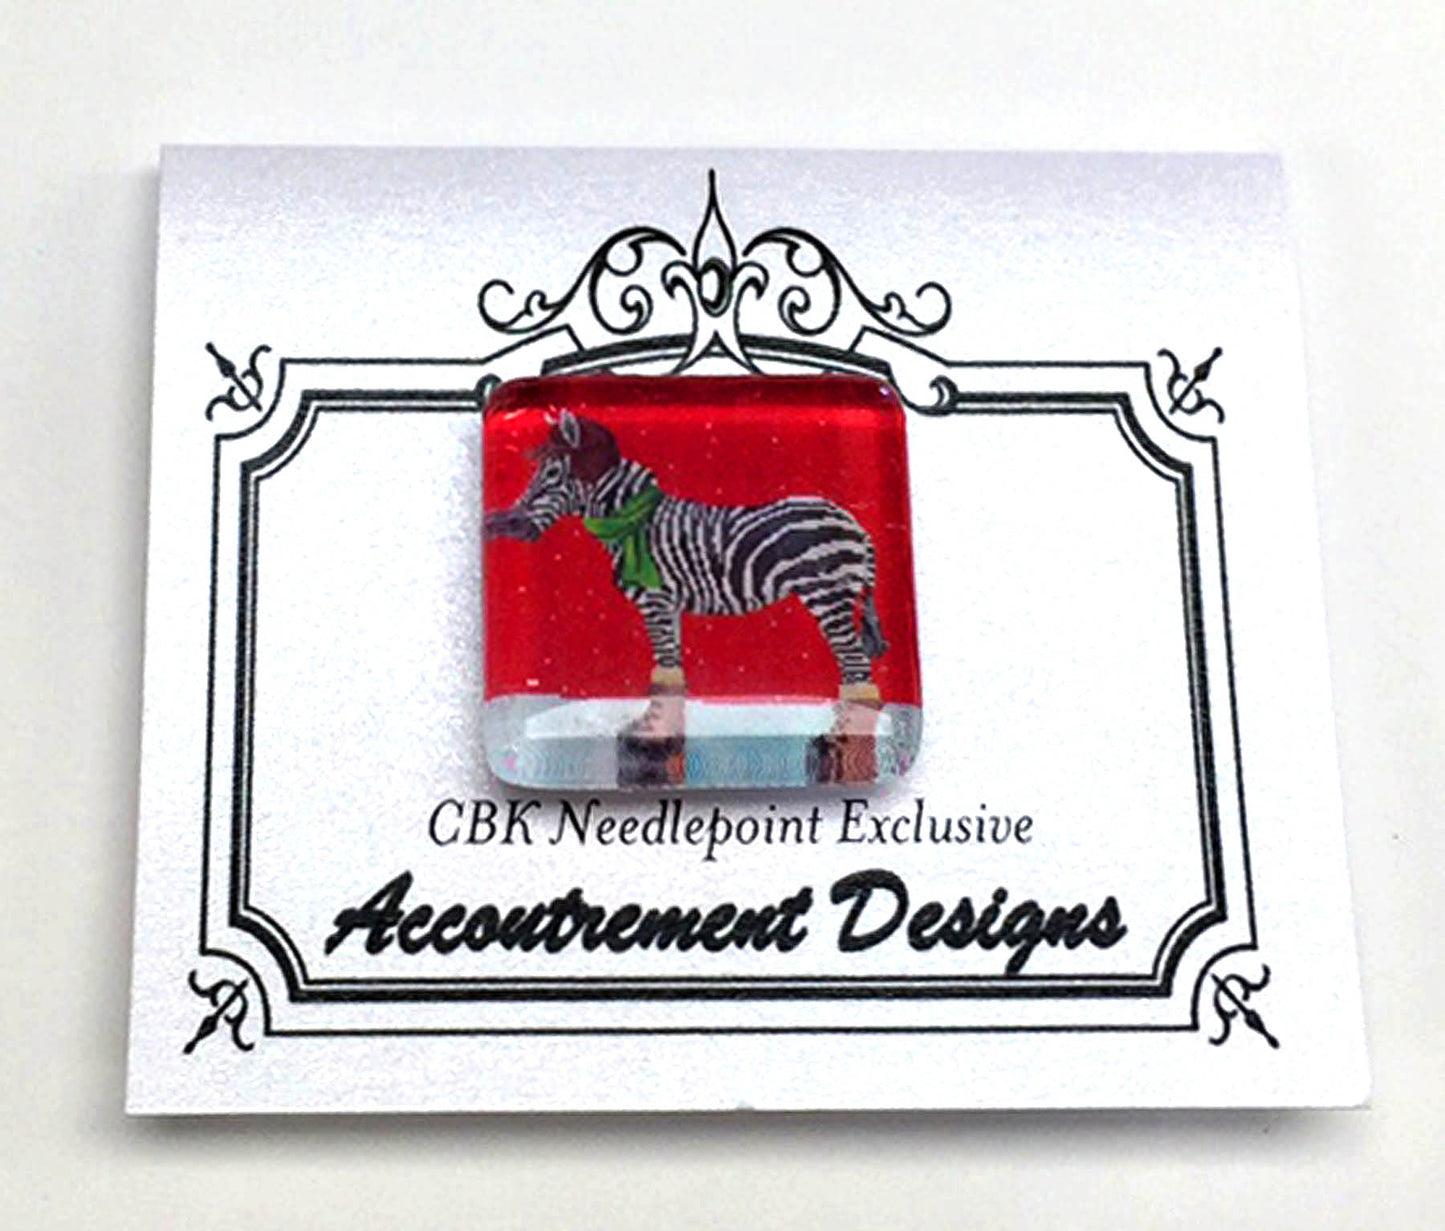 Magnet ~ Zebra Wearing Boots Magnet Needle Holder for Needlepoint & Sewing by Accoutrement Design Scott Church